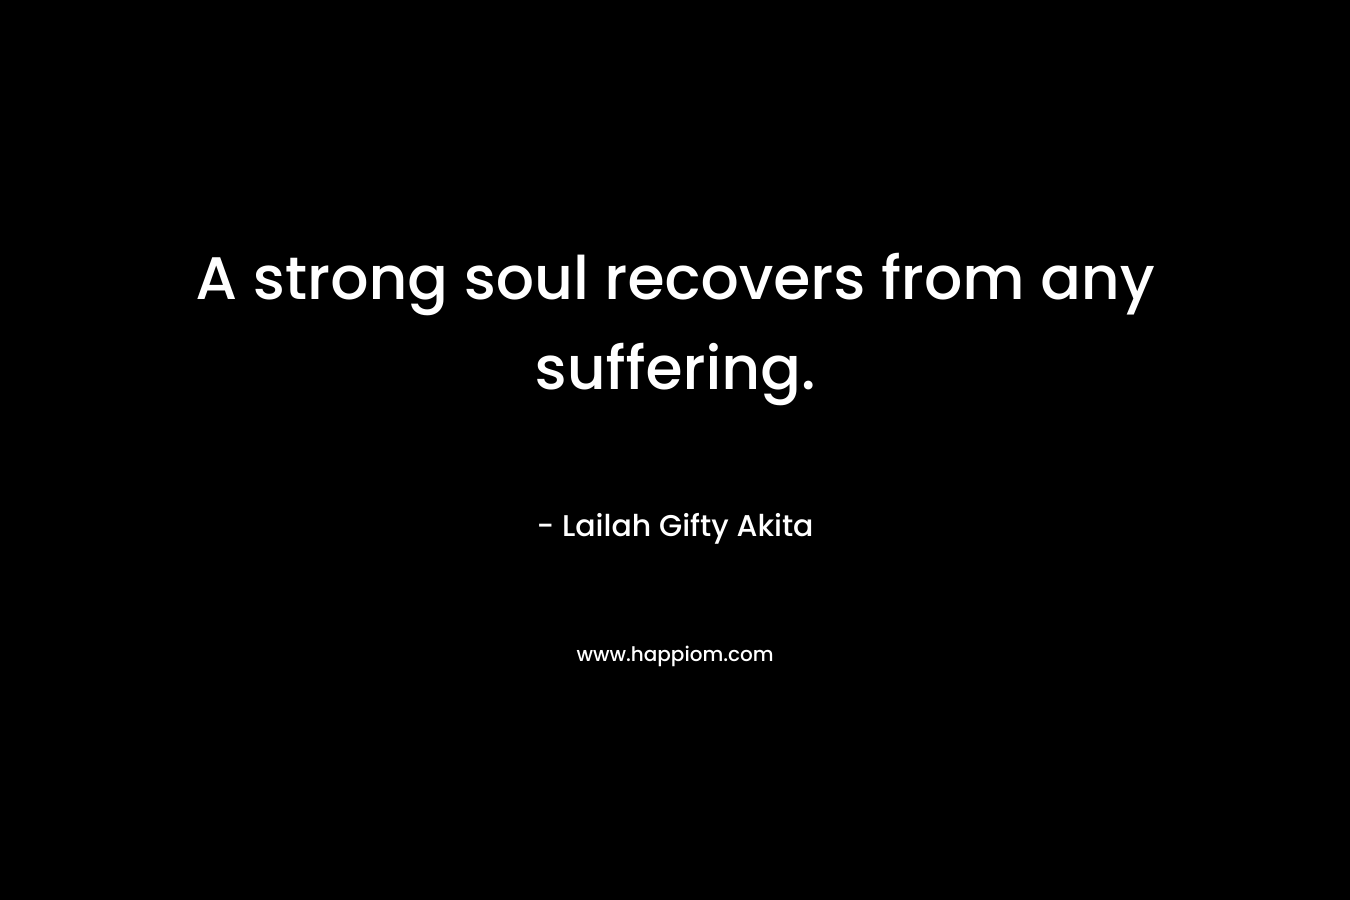 A strong soul recovers from any suffering. – Lailah Gifty Akita